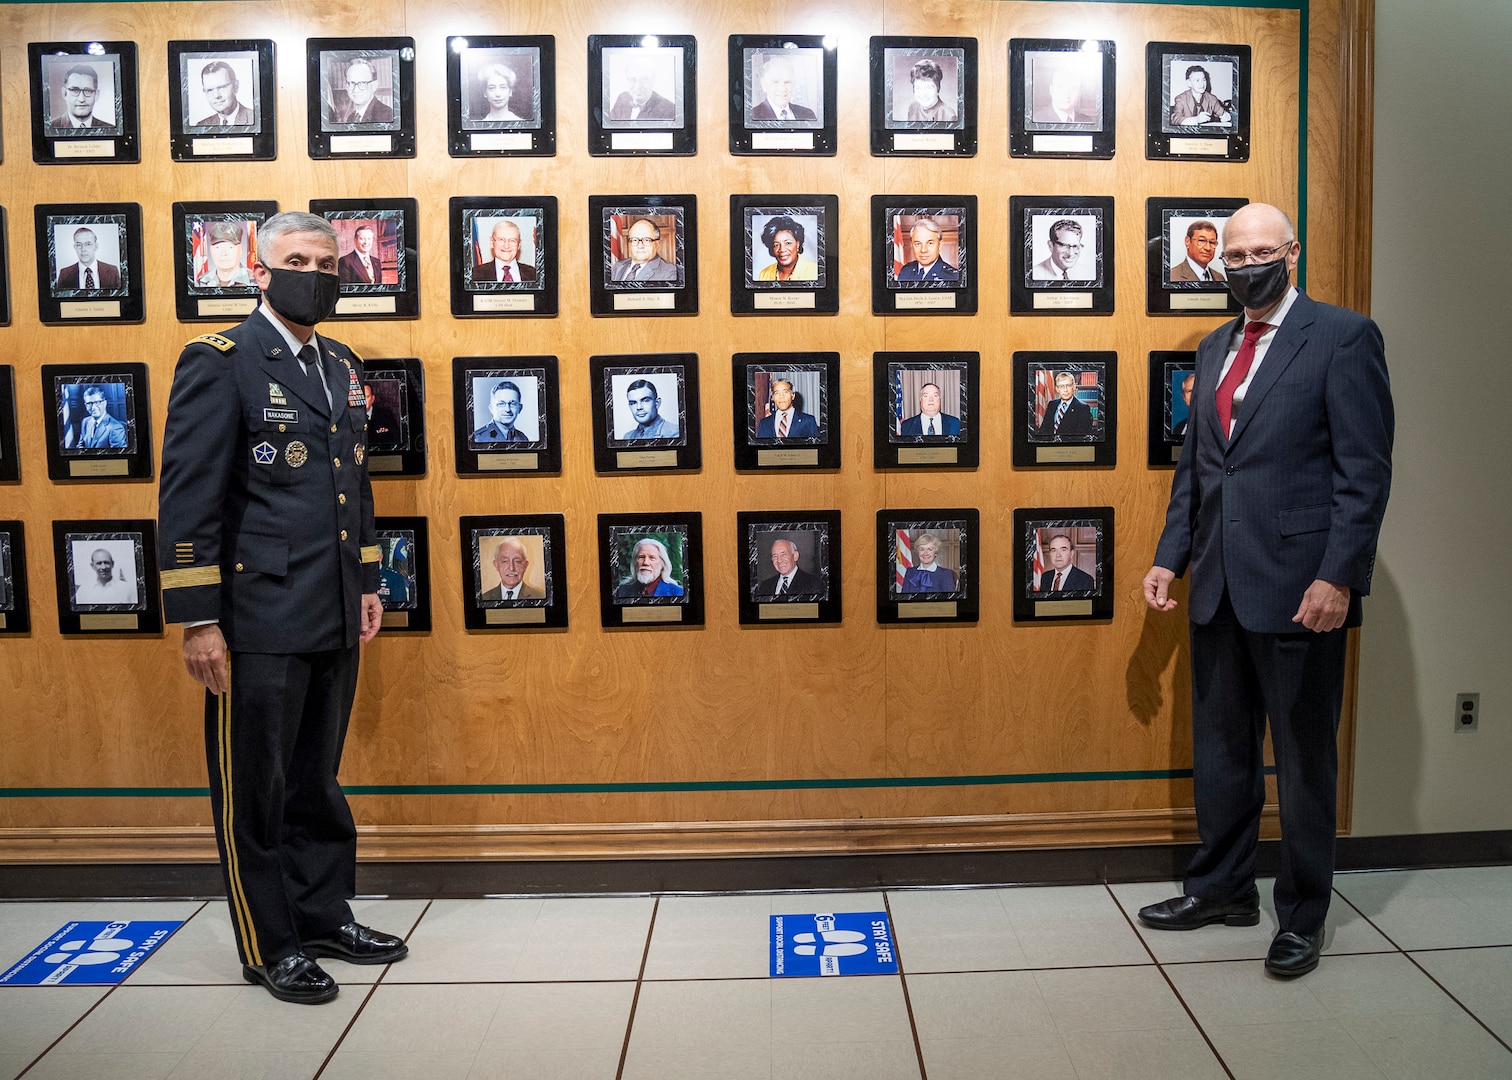 GEN Paul M. Nakasone, Commander, U.S. Cyber Command, Director, NSA/Chief CSS, (left) and George Barnes, NSA Deputy Director, (right) stand for a photo near the portraits of this year’s inductees into the NSA/CSS Cryptologic Hall of Honor